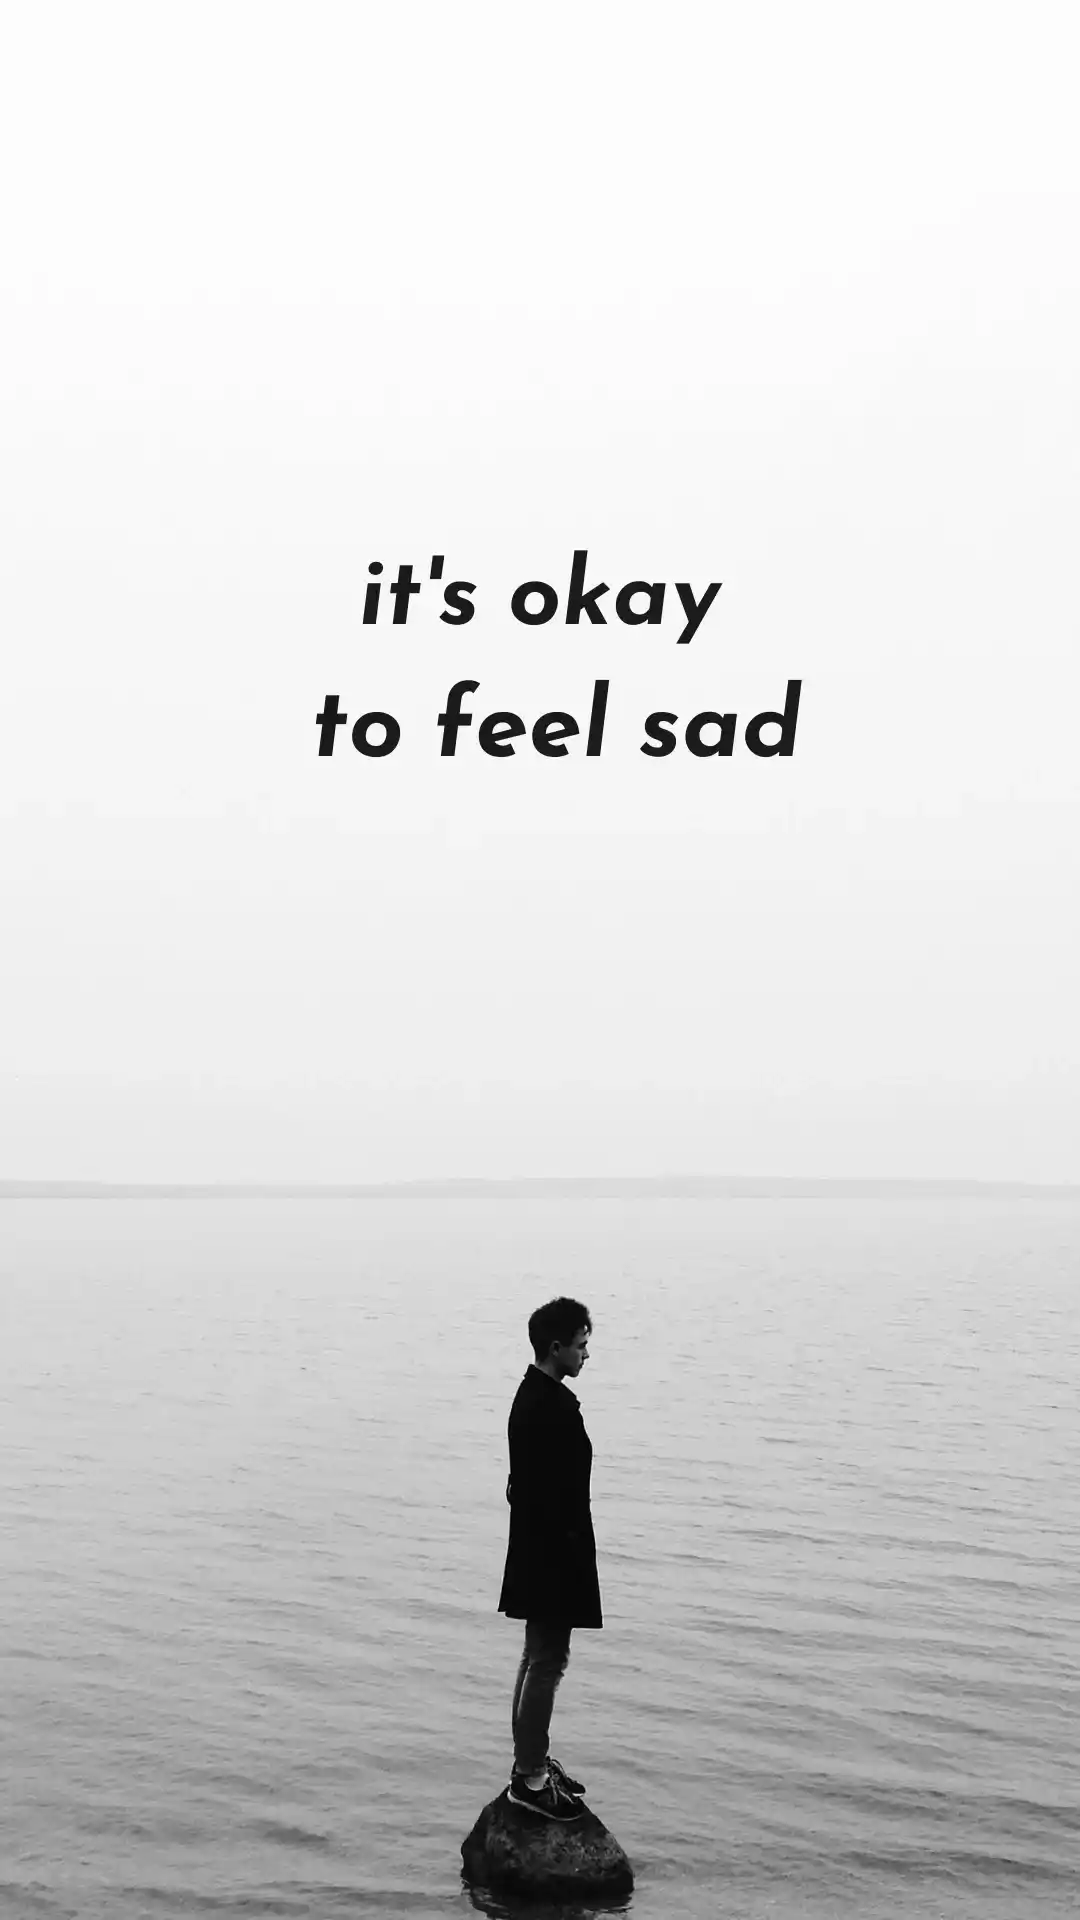 its okay to feel sad free quote wallpaper for mobile